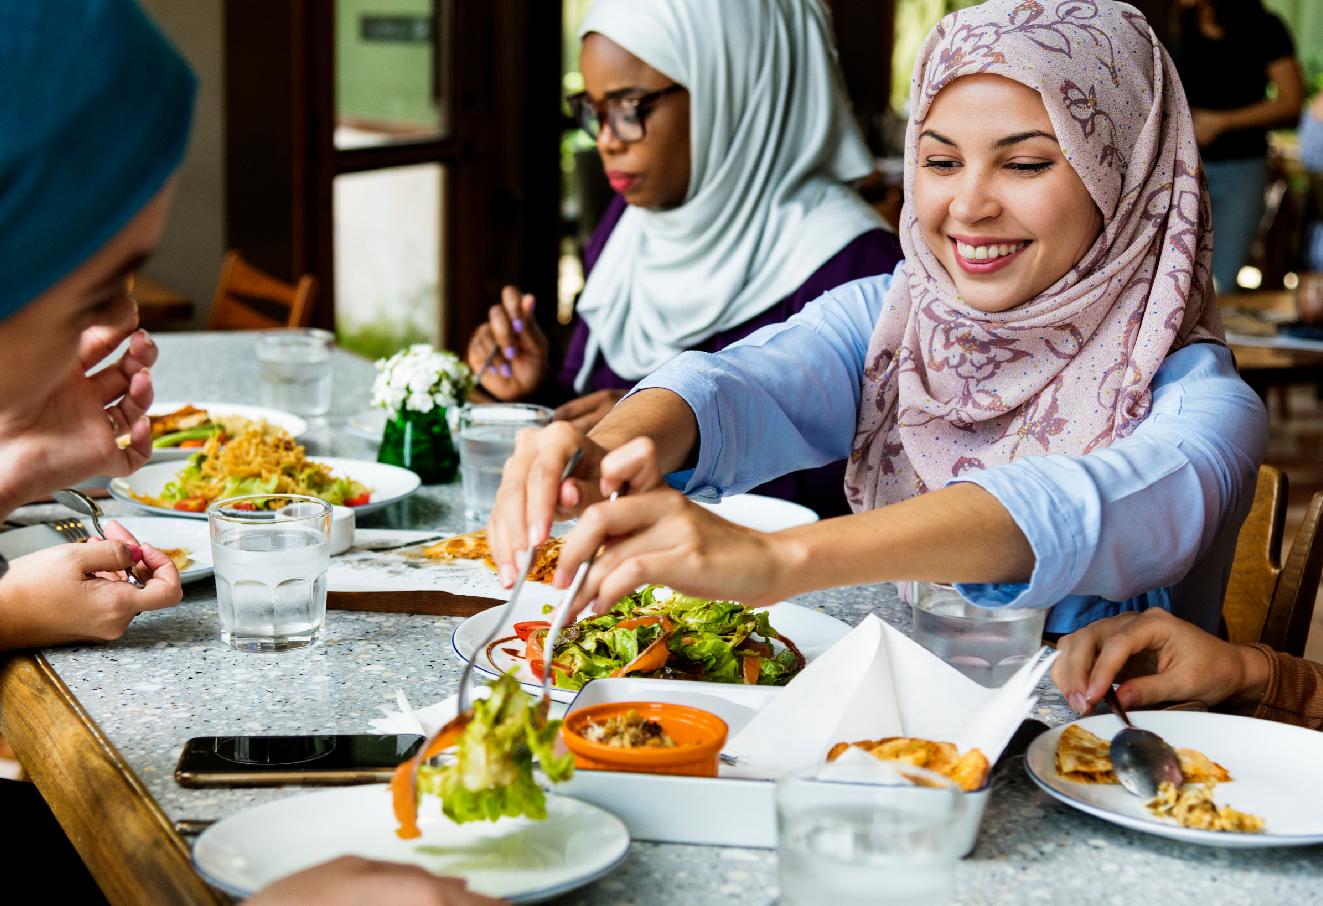 Three muslim girls are having lunch together.